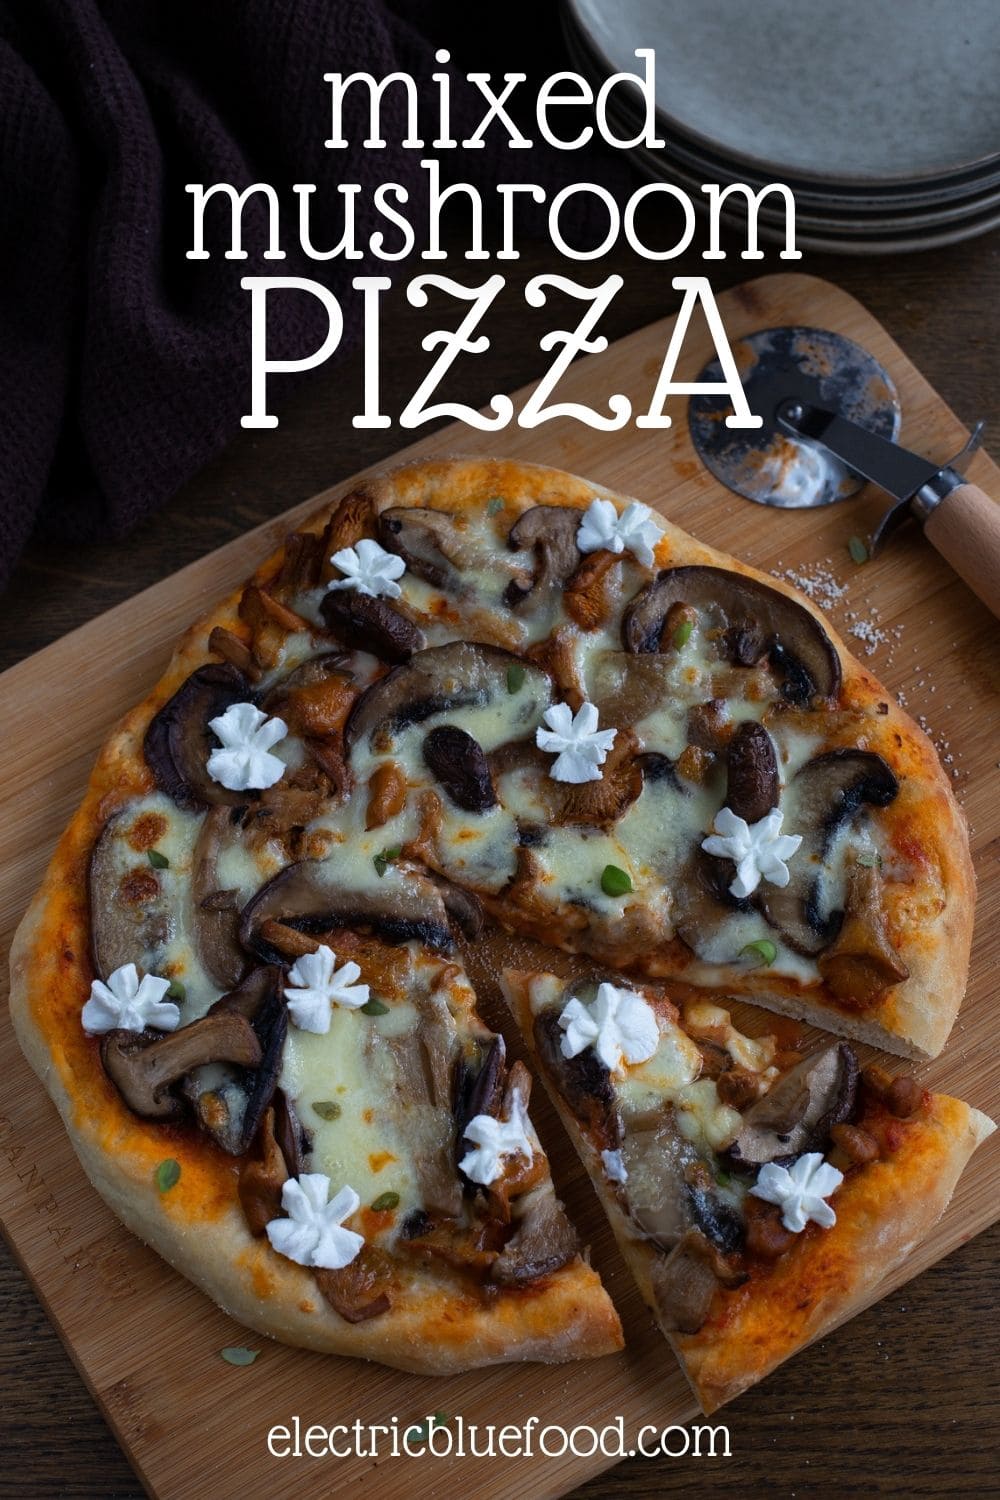 Mixed mushroom pizza with goat cheese swirls is a delicious vegetarian pizza that features 4 different types of mushrooms and a cute finish with piped fresh goat cheese.